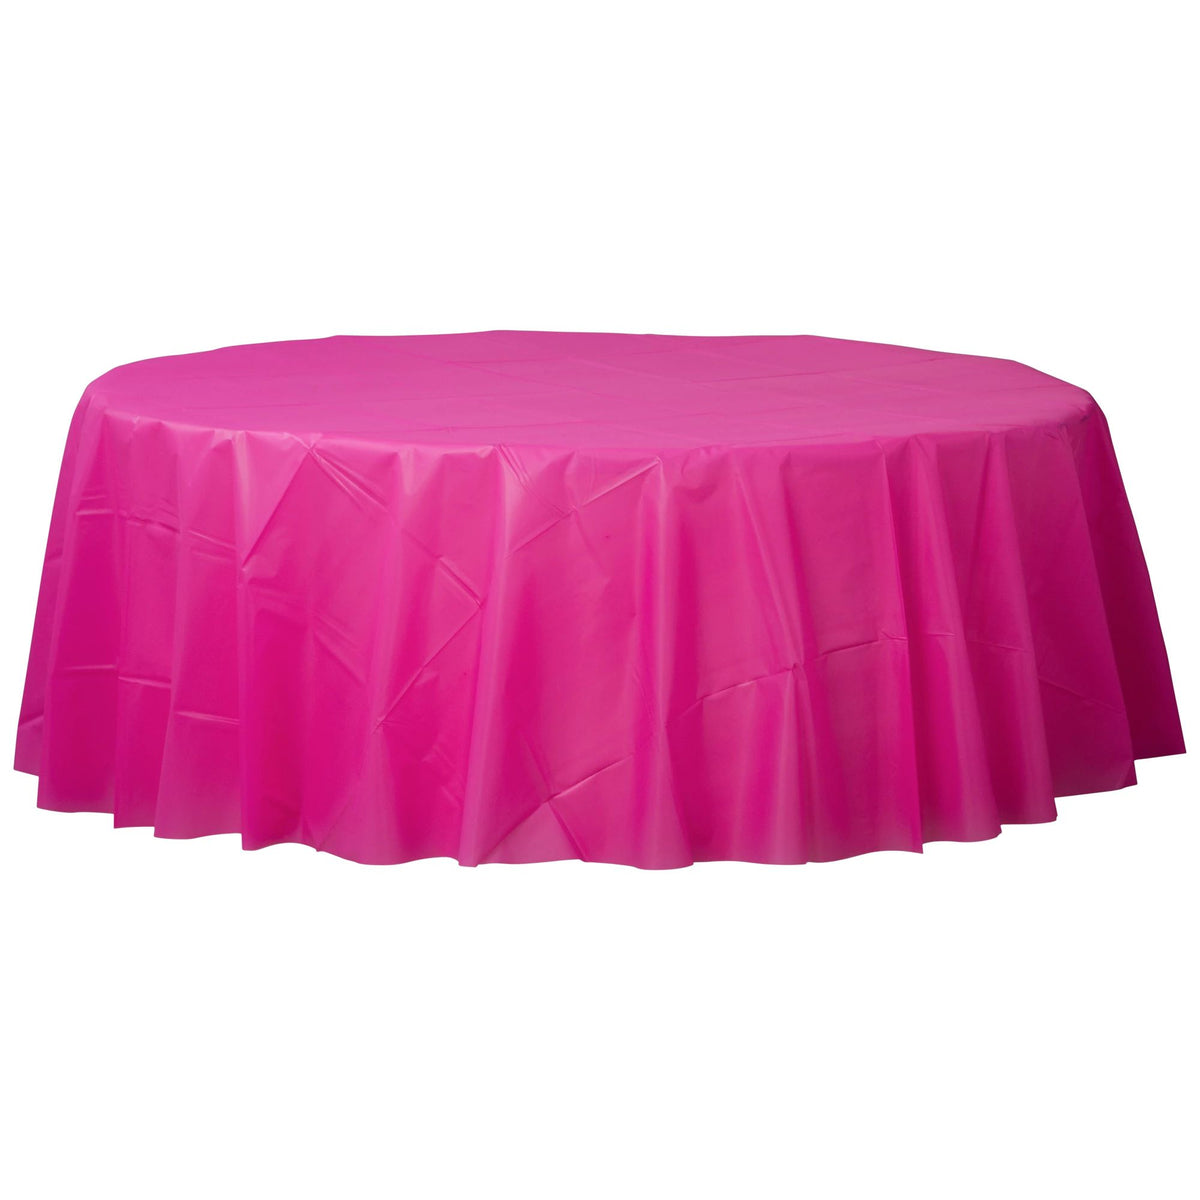 Bright Pink 84" Round Plastic Table Cover